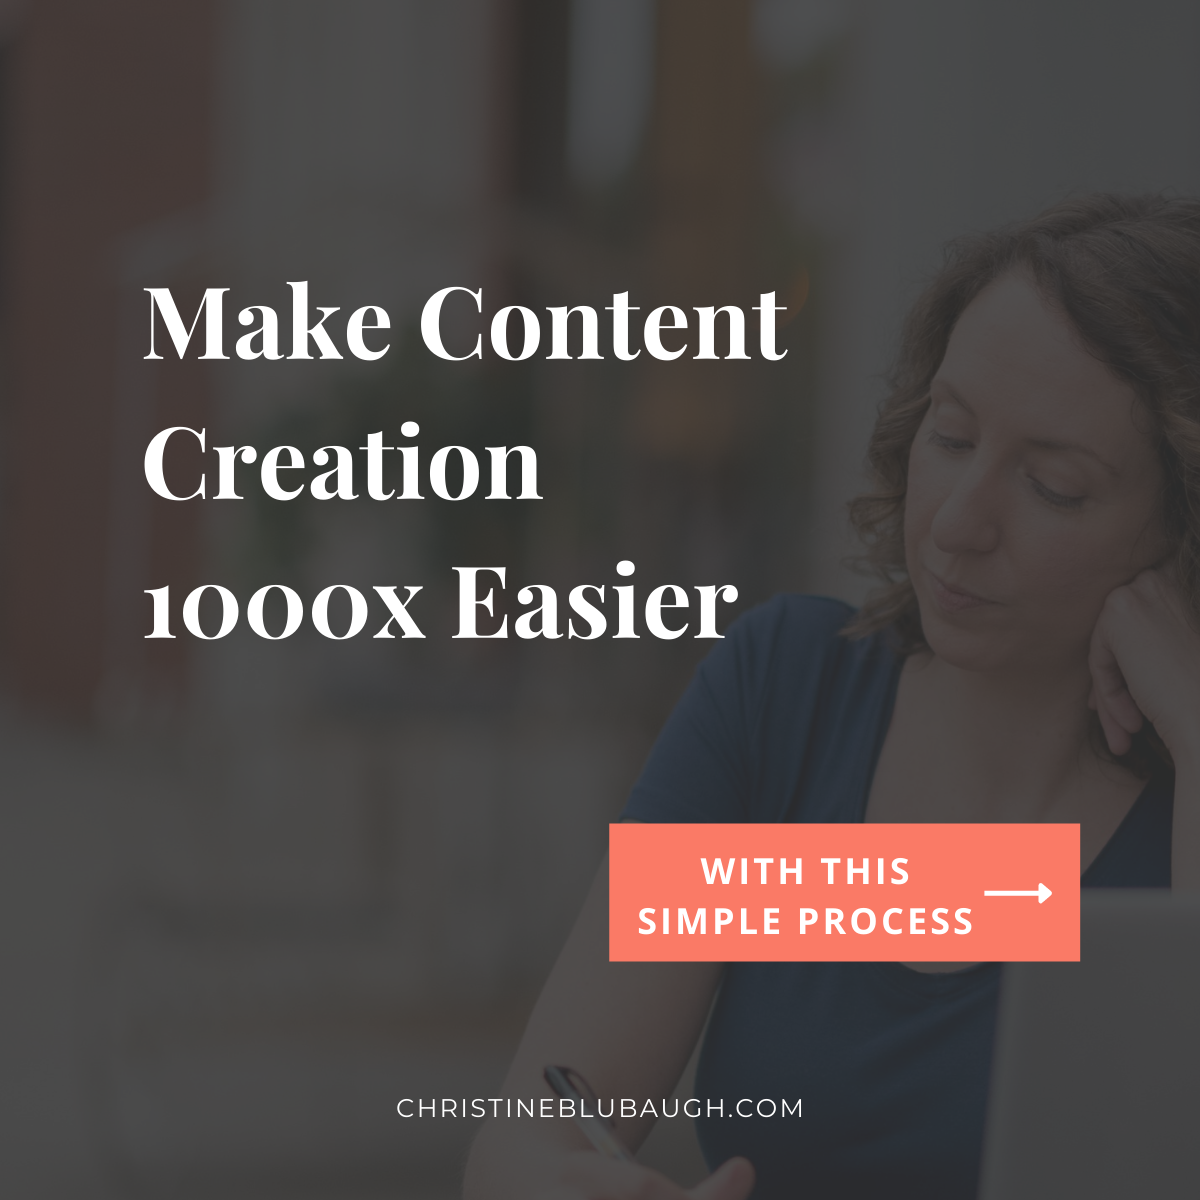 Make Content Creation 1000x Easier with this Simple Process